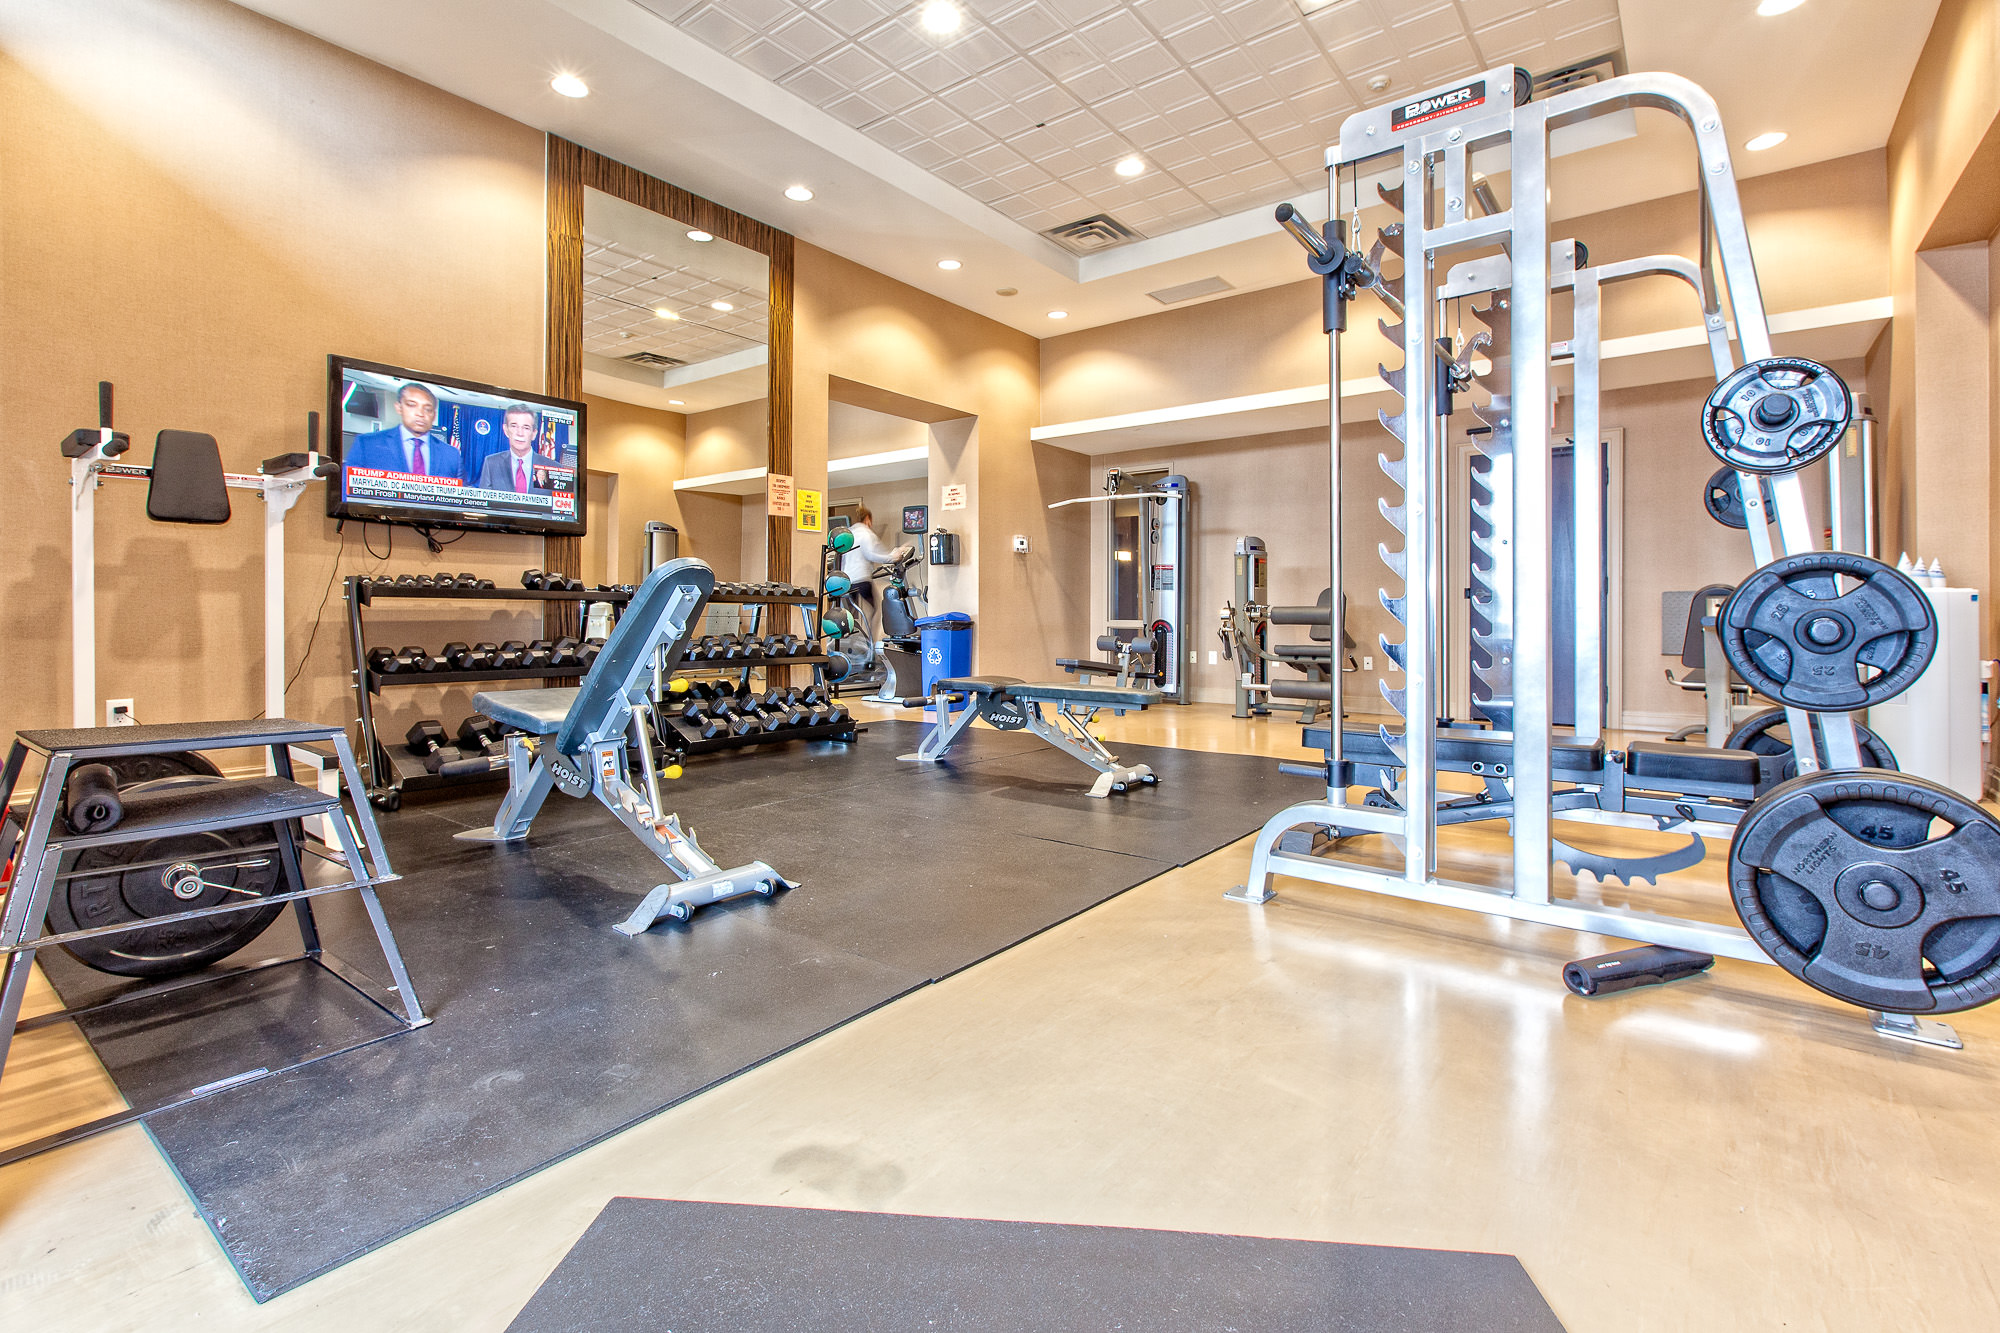 30 Minute Workout Studio City for Gym